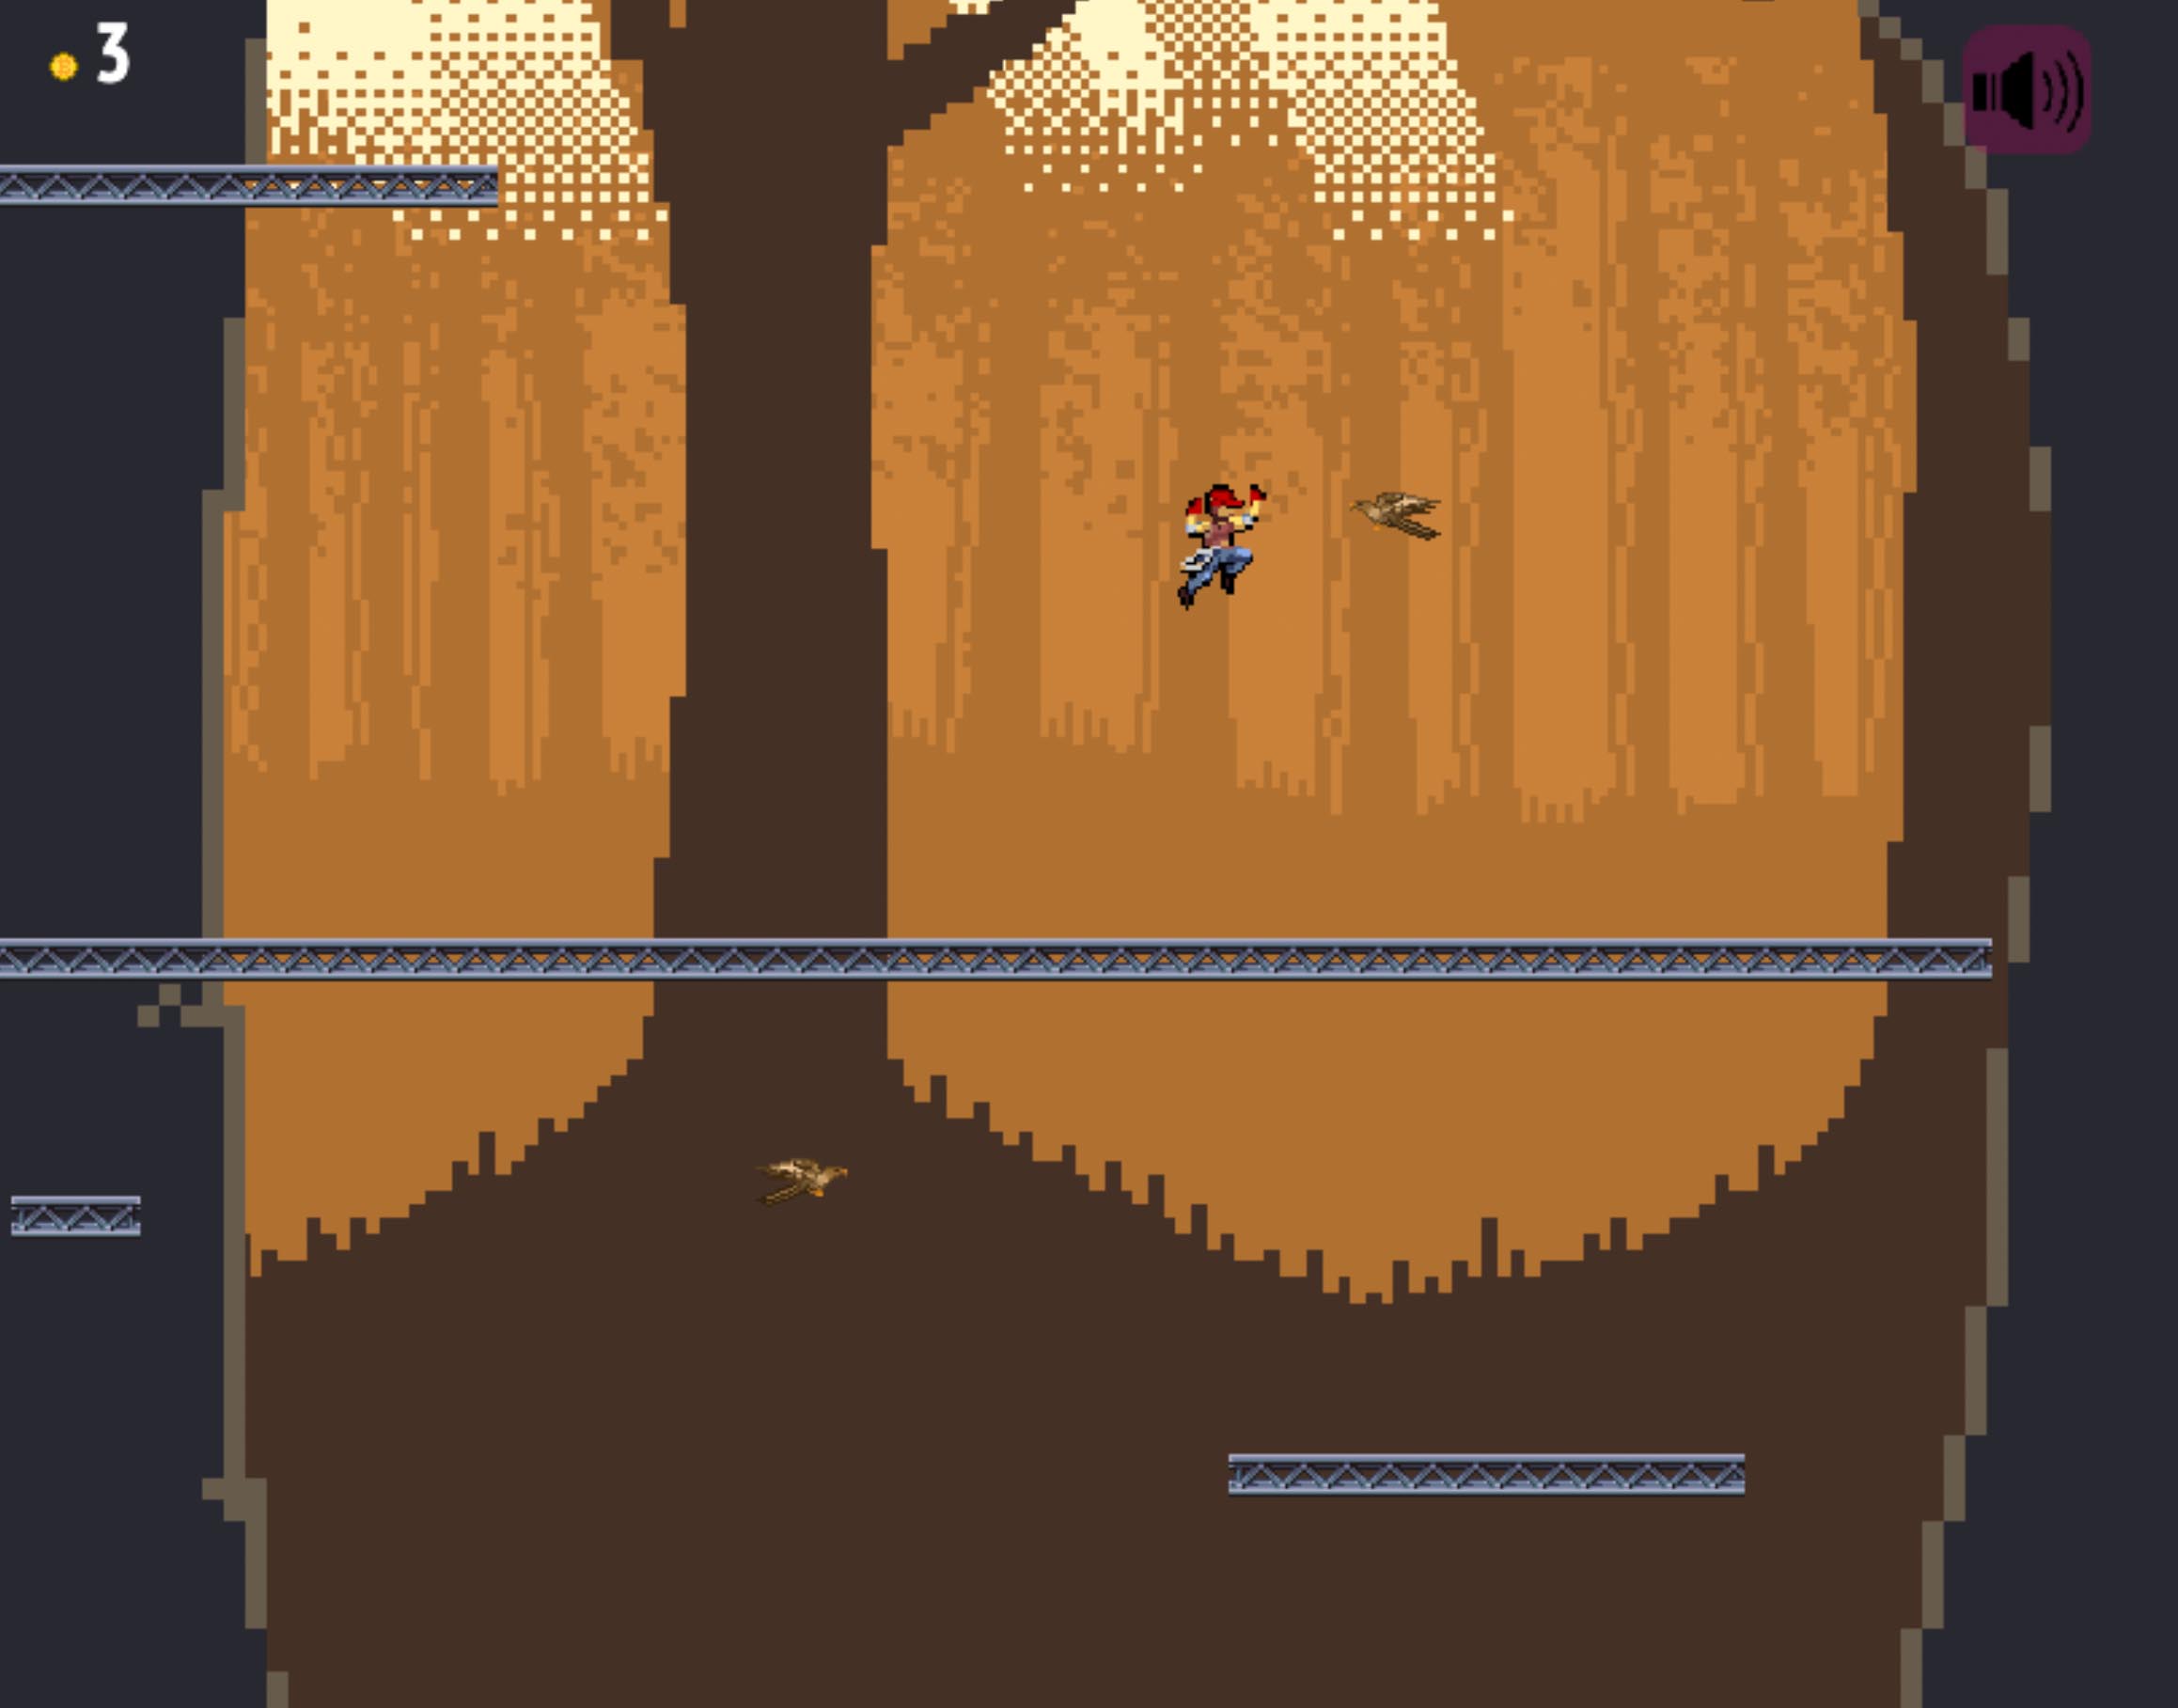 This is a screenshot from Context Clues Climber. The player is jumping on girders through a sunlit forest.